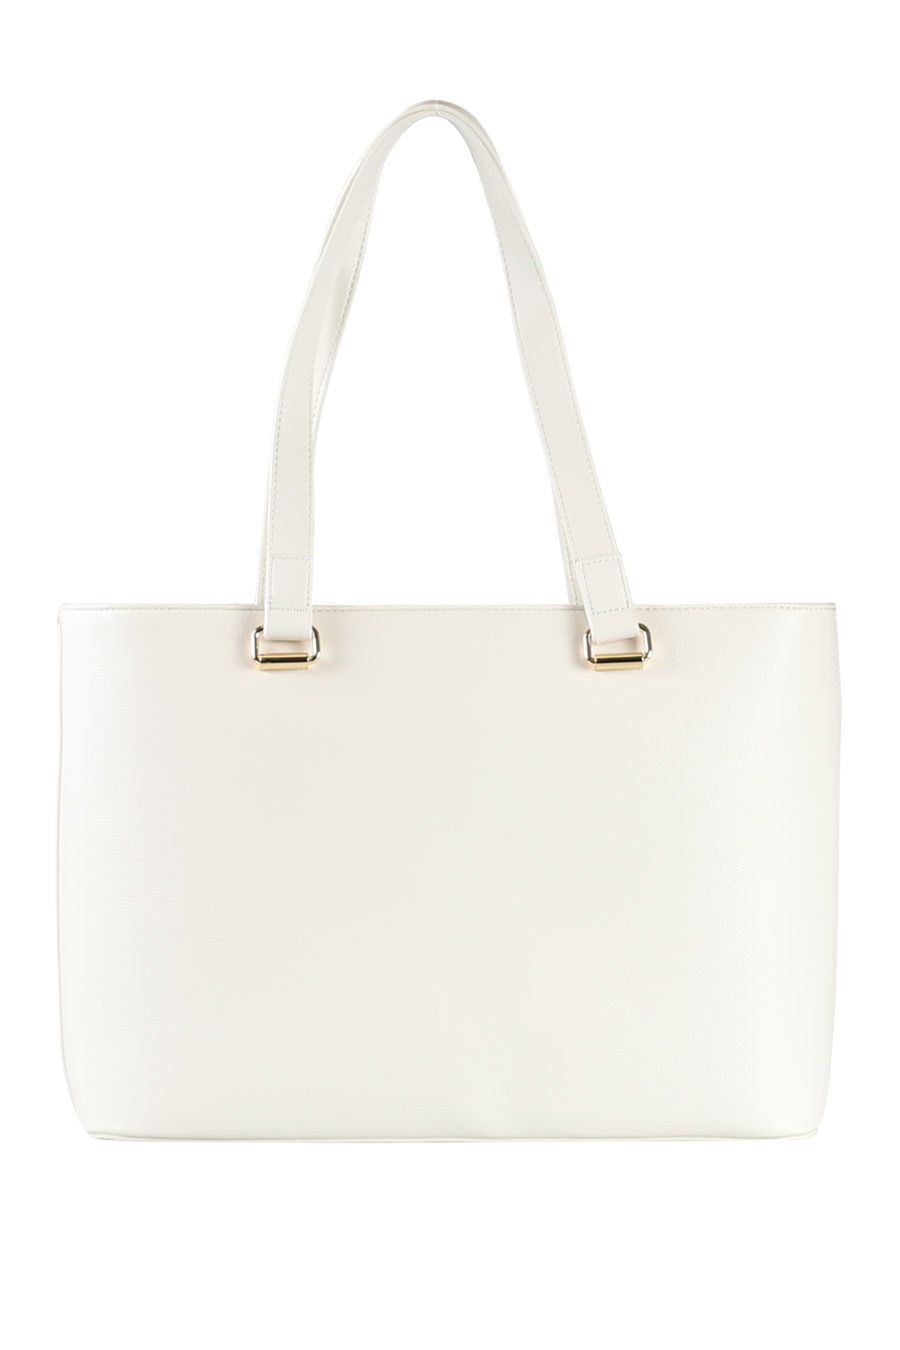 White "Shopper" bag with embroidered logo - IMG 1603